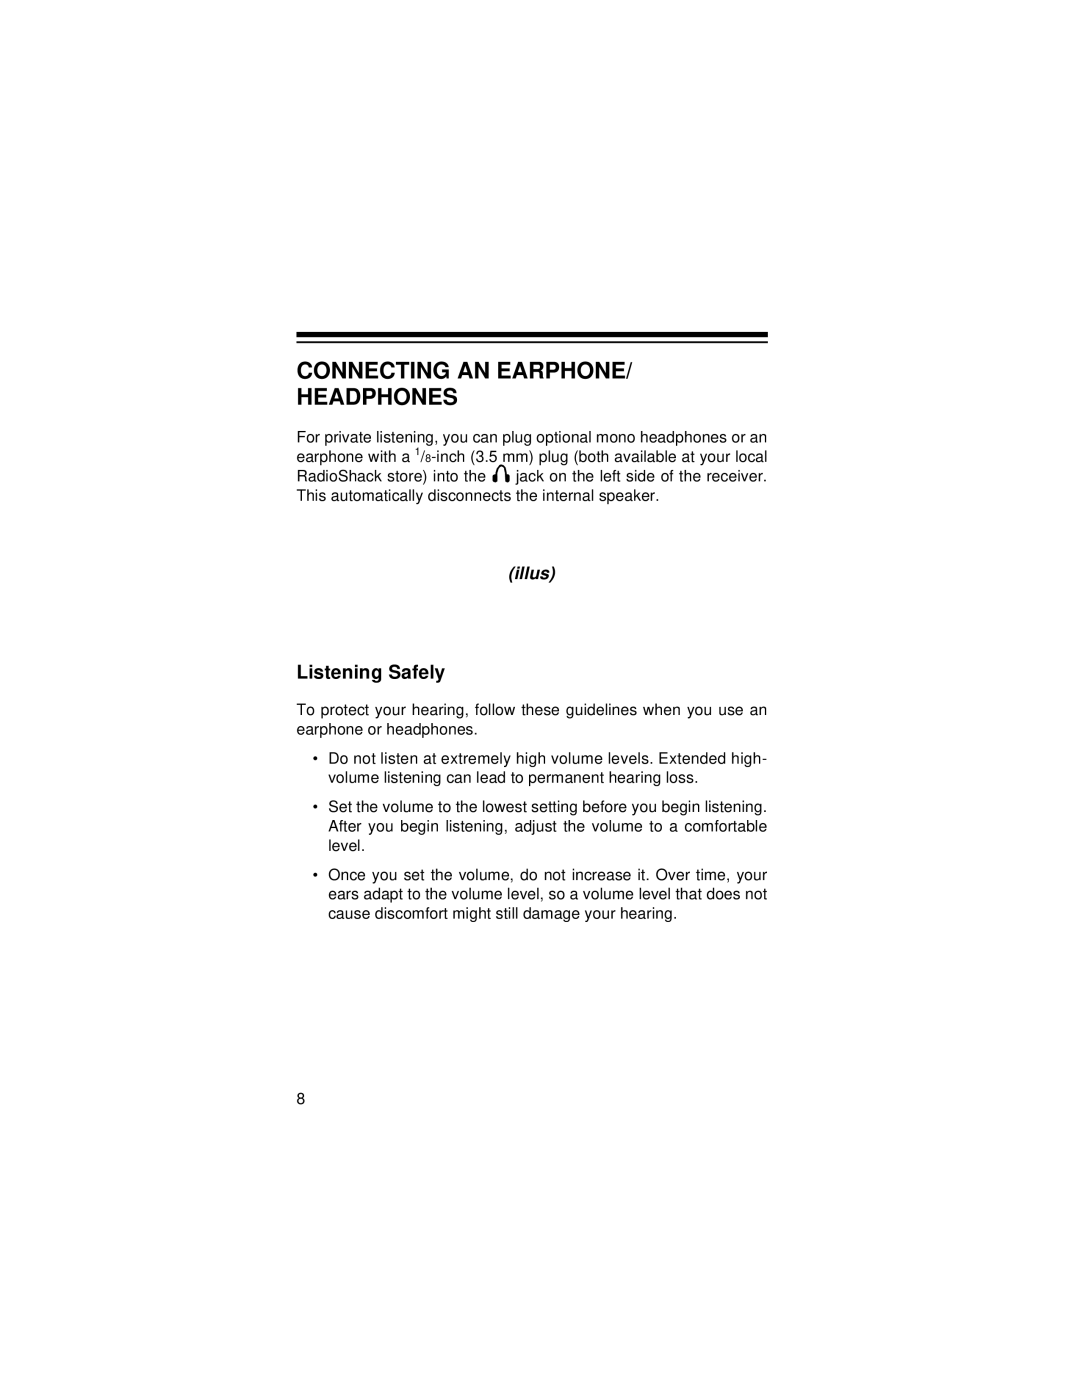 Radio Shack DX-397 owner manual Connecting An Earphone Headphones, Listening Safely, illus 